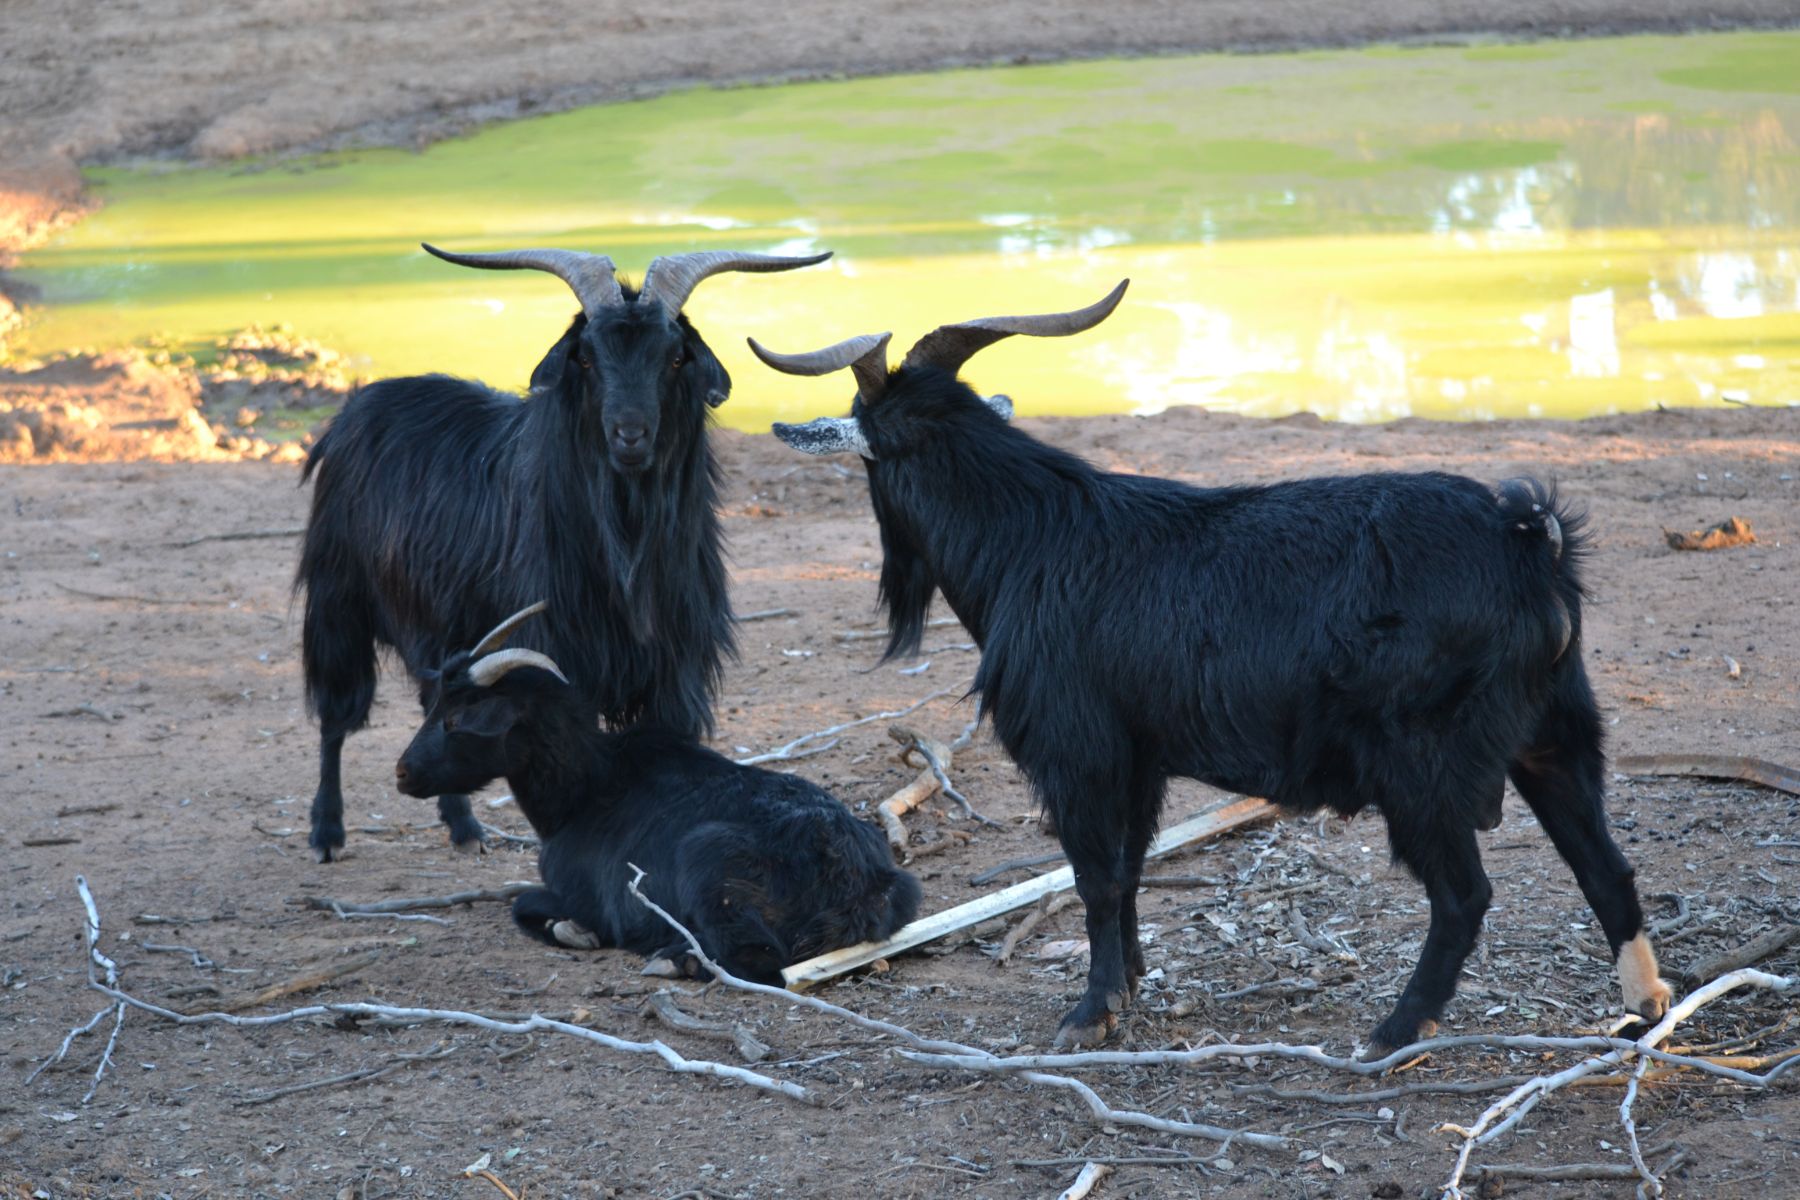 Three black goats stand on the banks of a green, polluted waterway